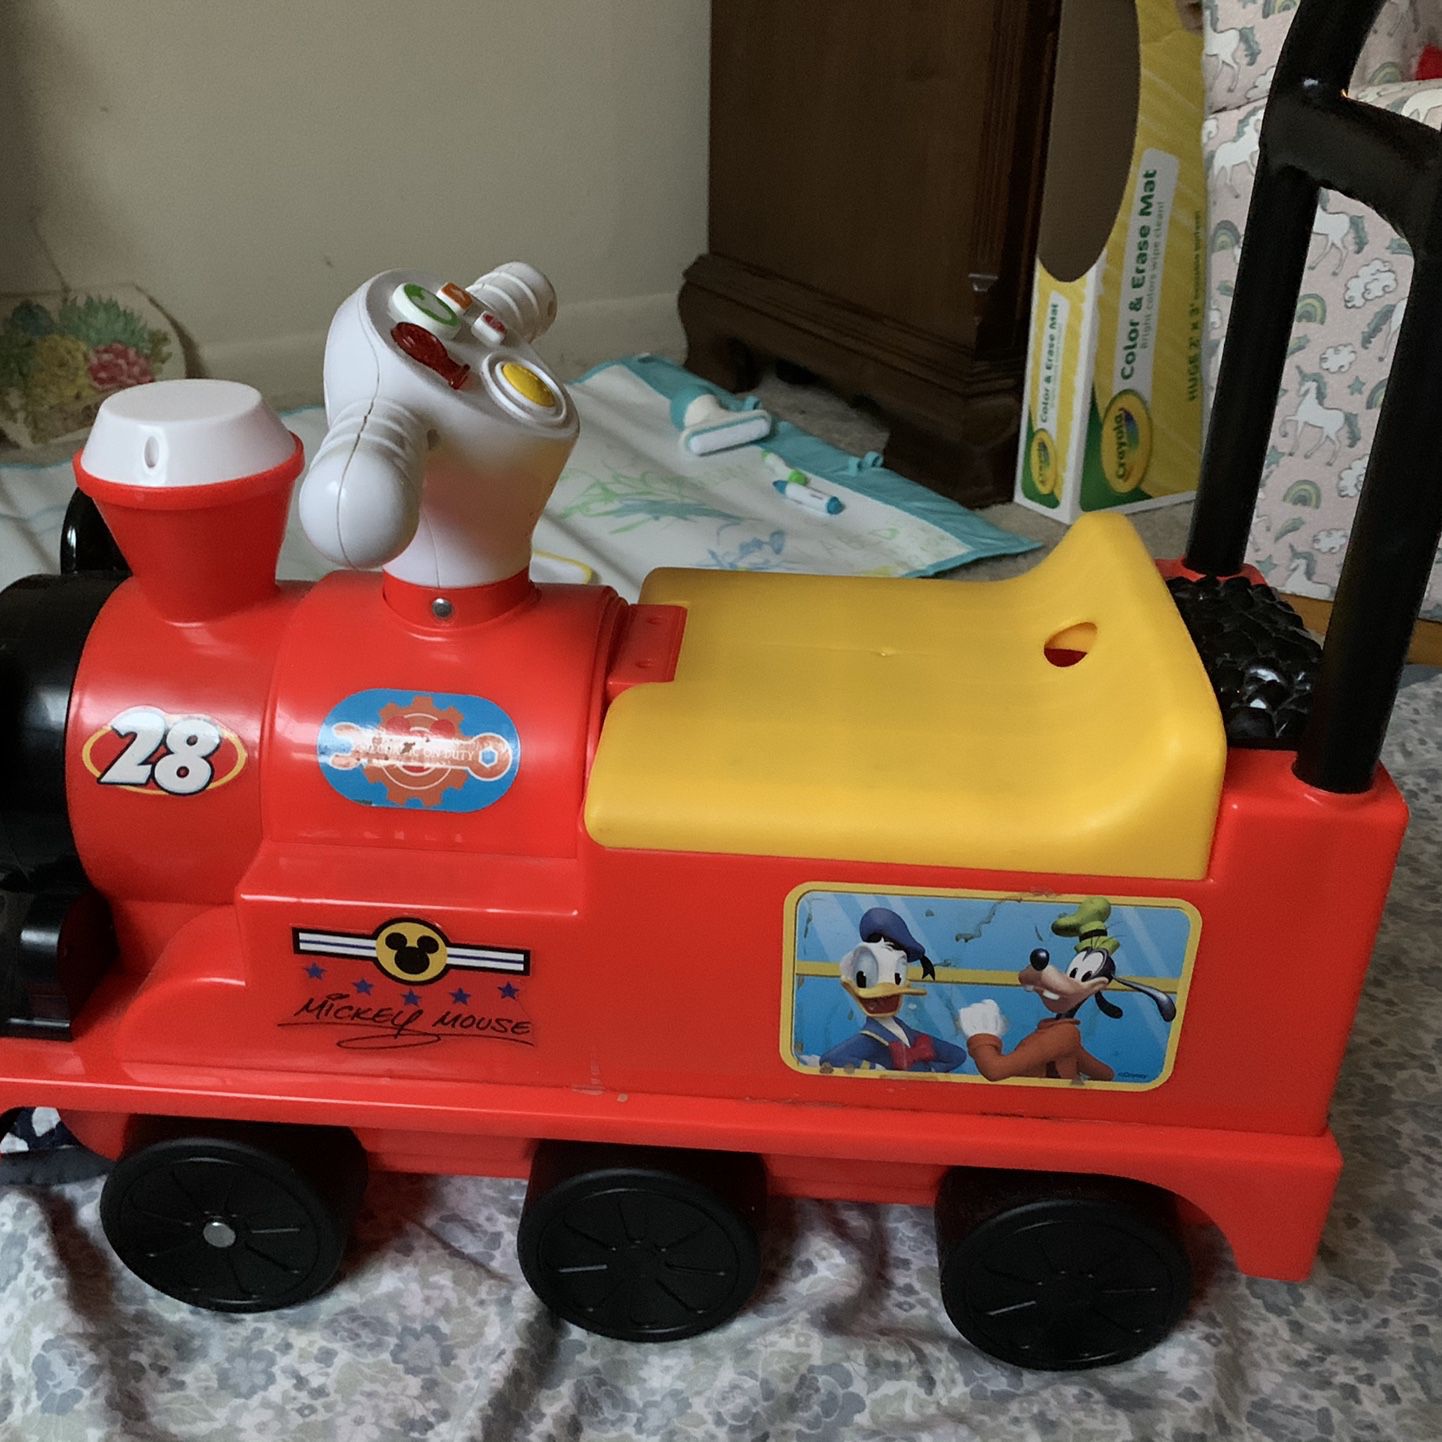 Disney Ride On Vehicle Toy / Push And Ride Train